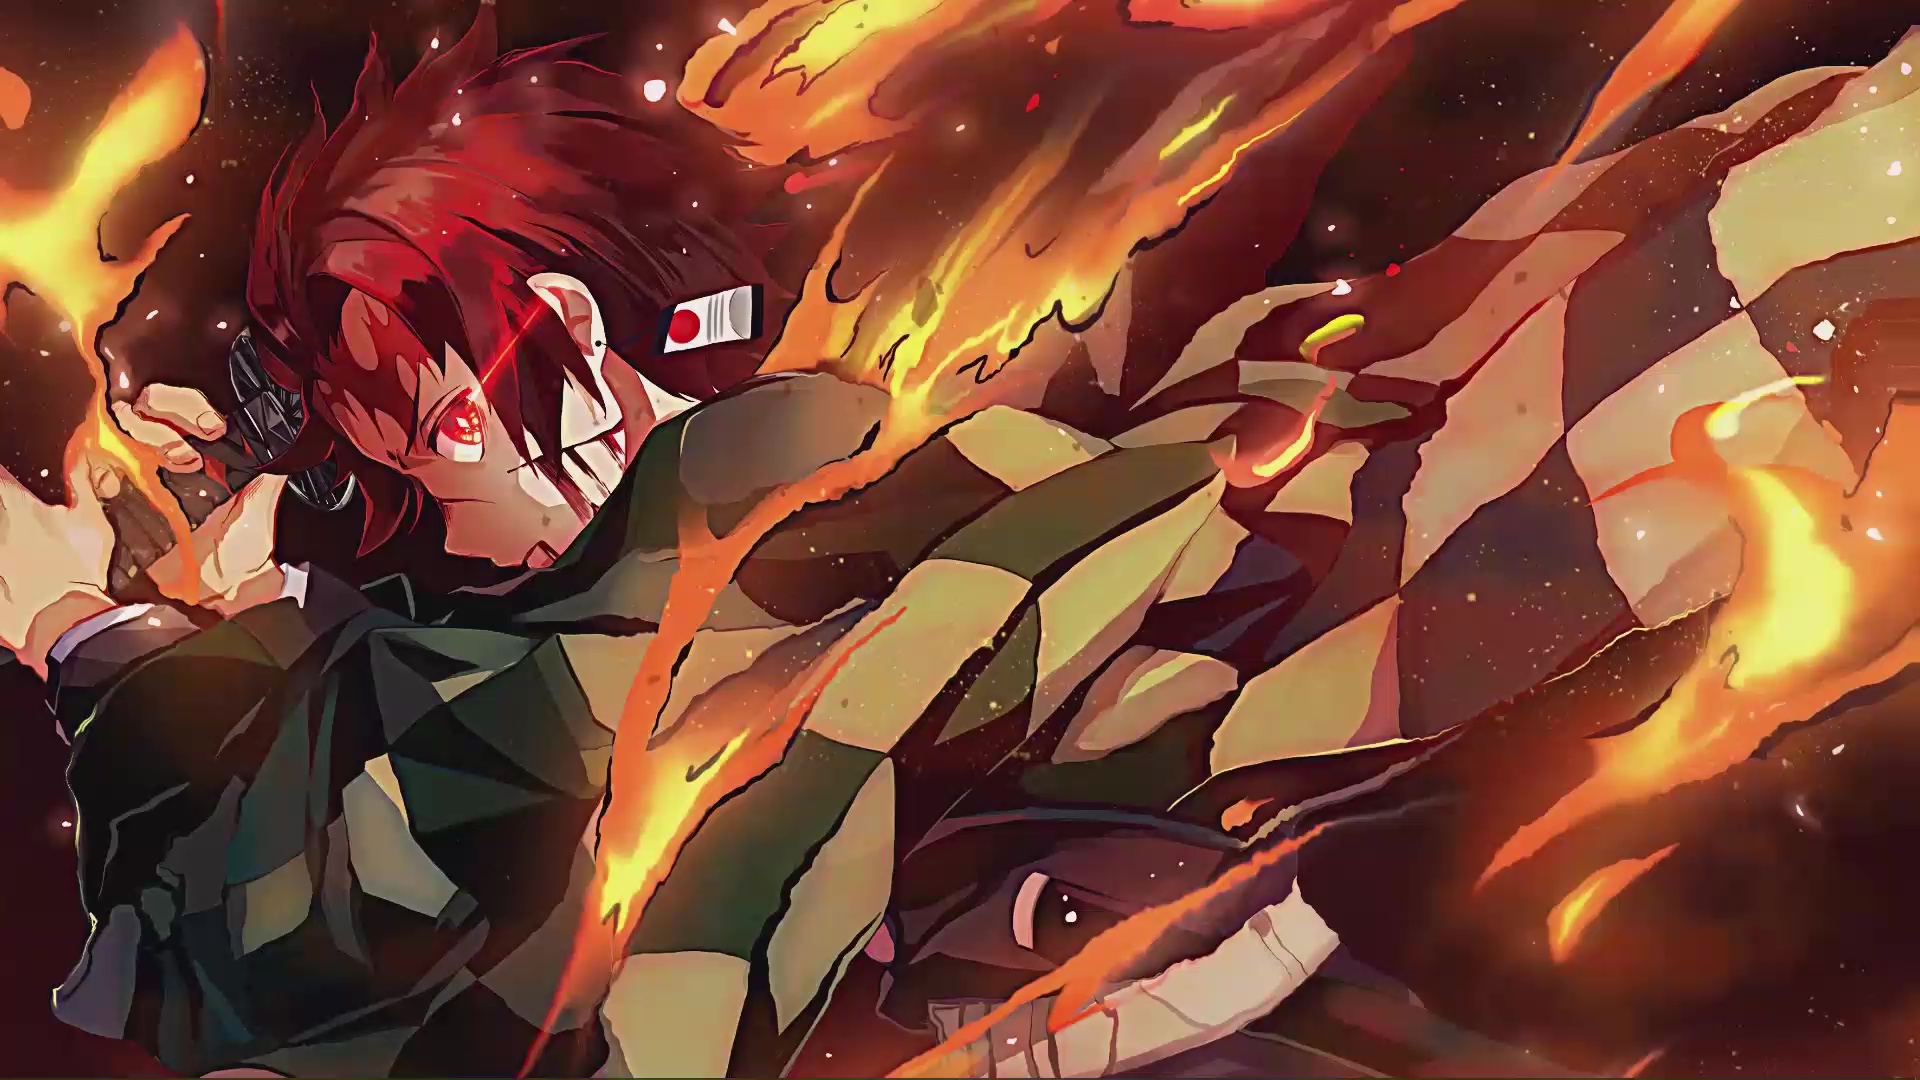 Anime Devil With Fire Effect Wallpaper Download | MobCup